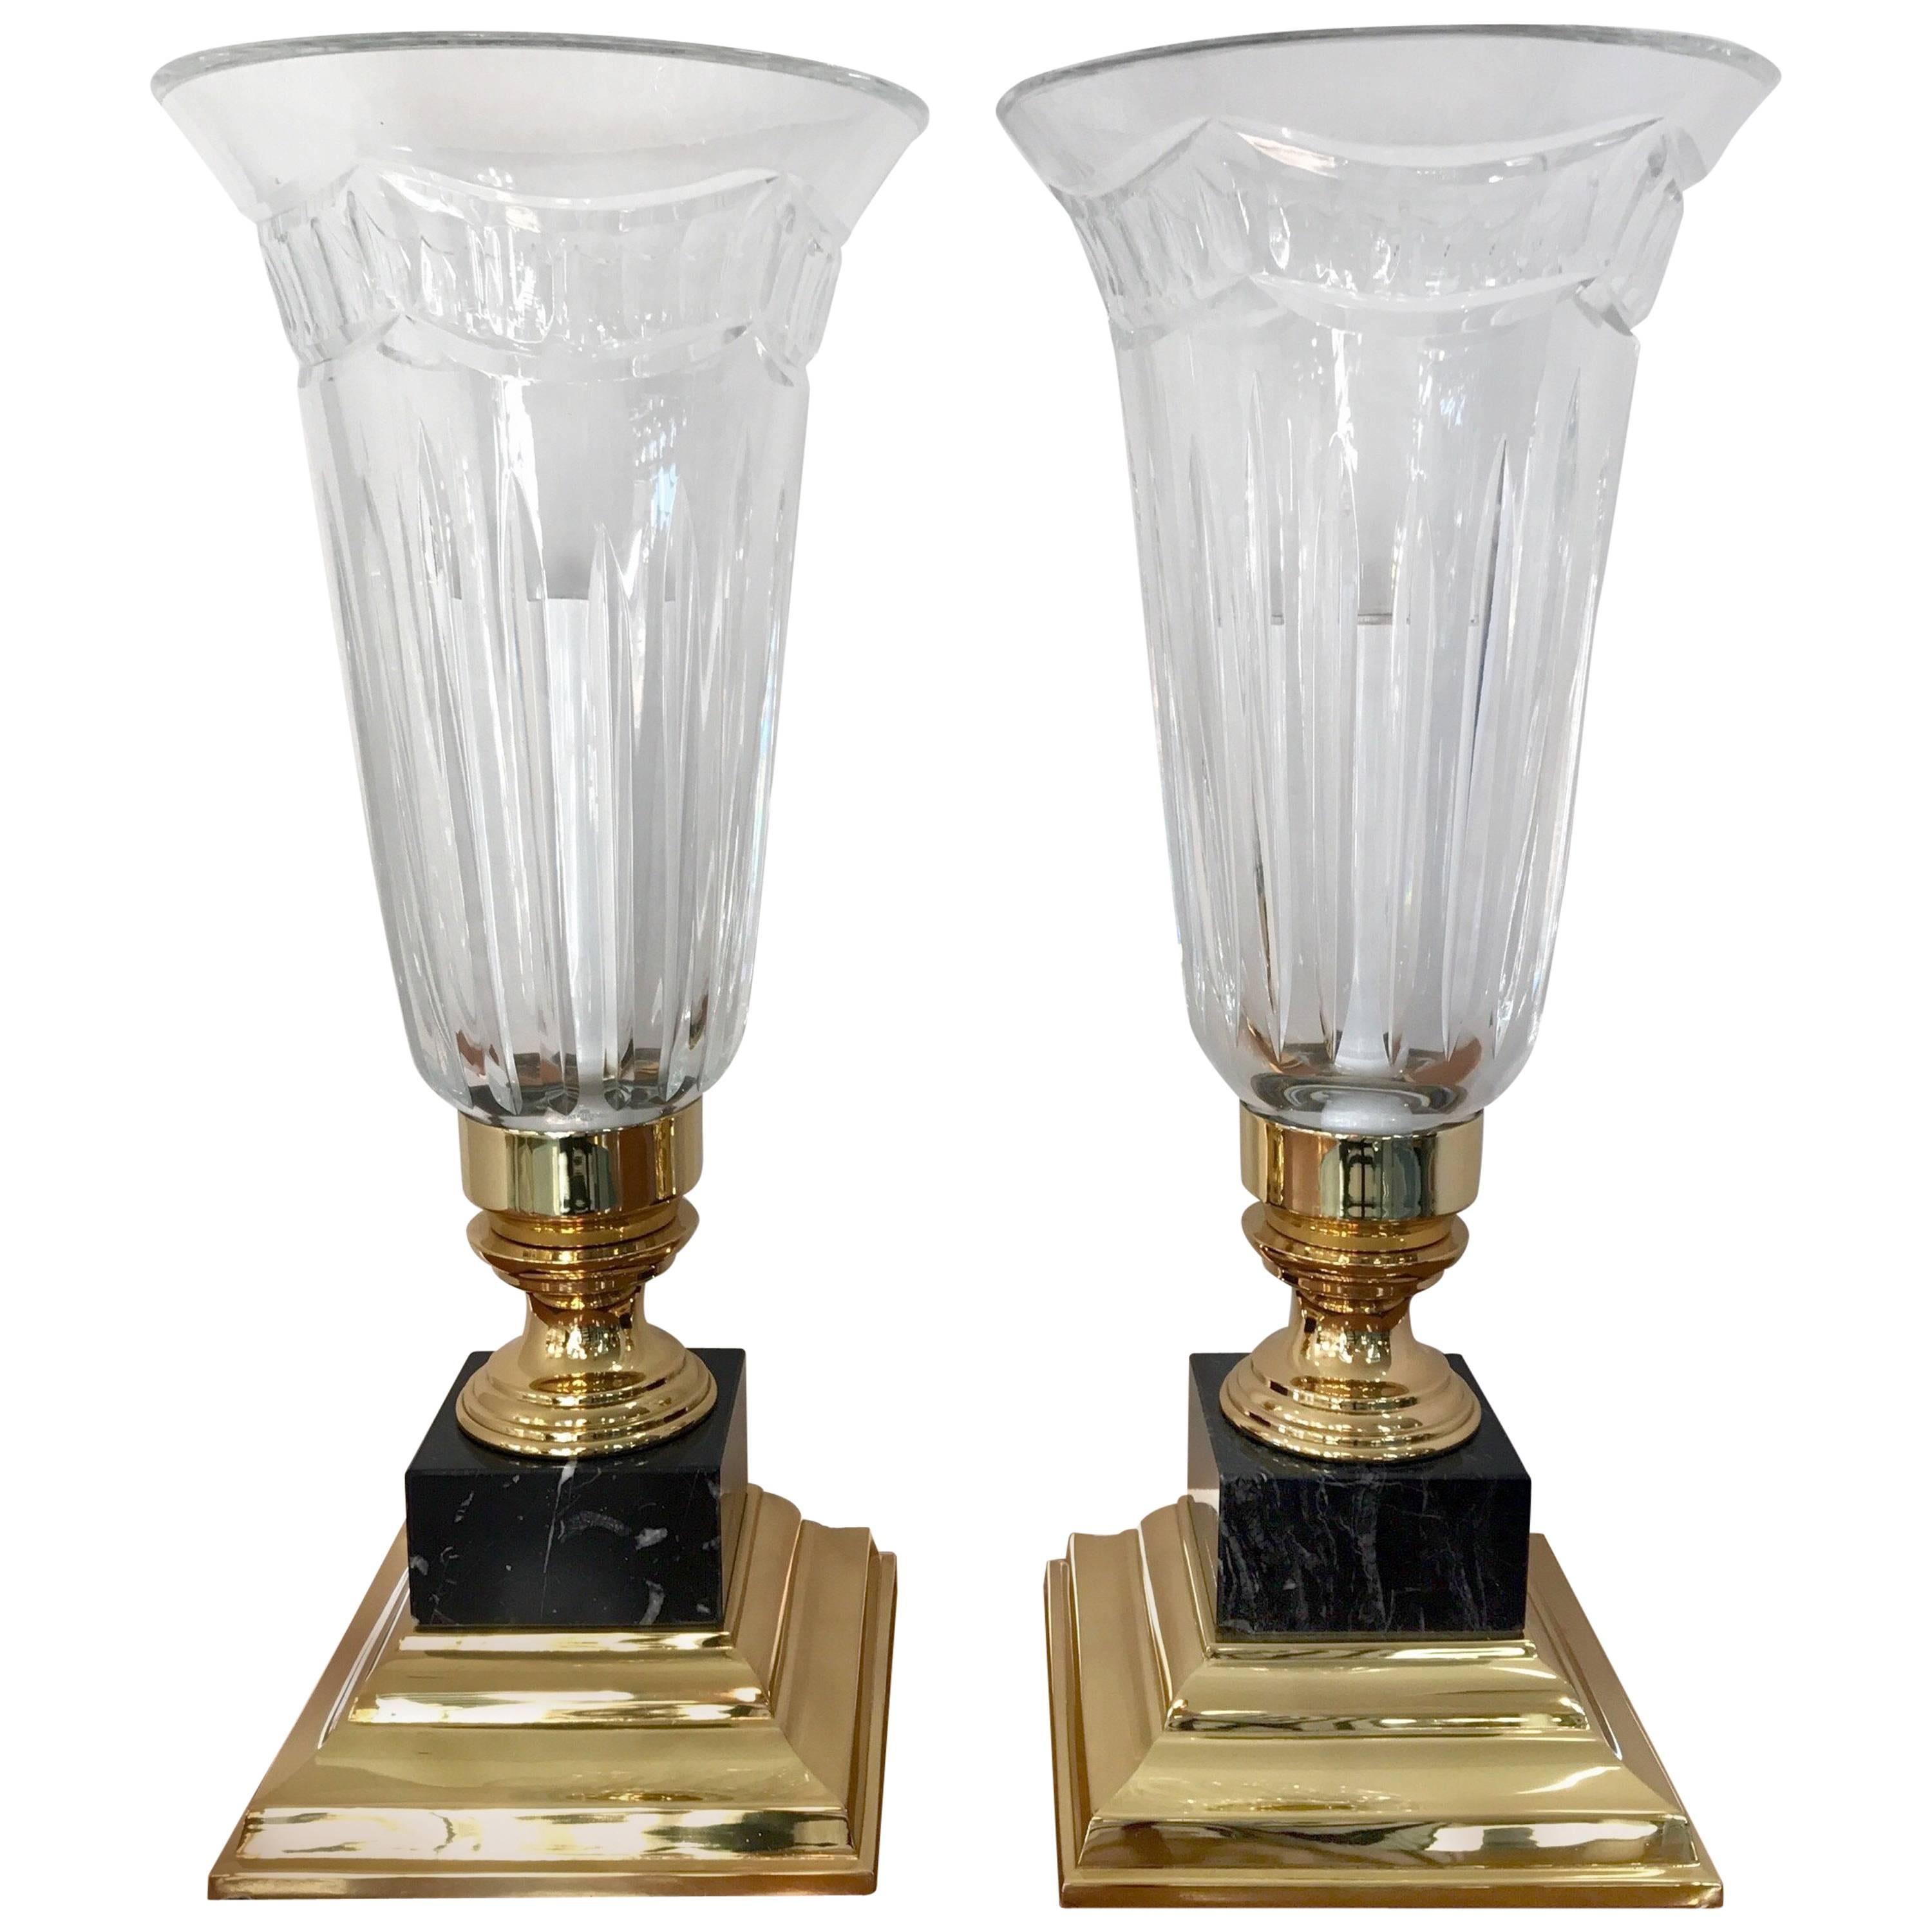 Pair of Waterford Crystal Electric Hurricane Lamps Pompeii Marble Base